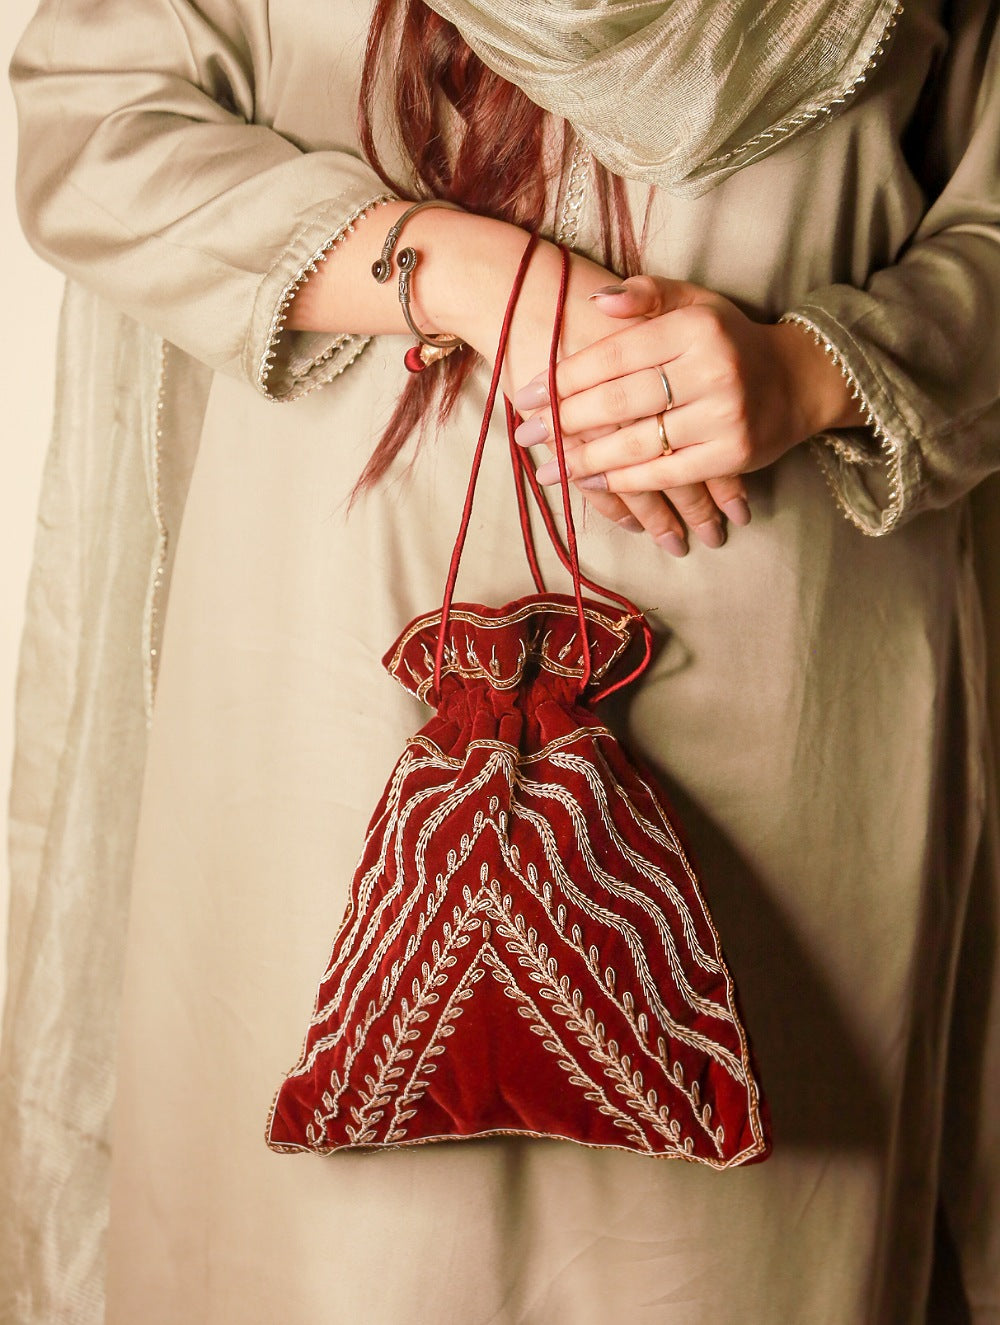 Load image into Gallery viewer, Zardozi and Resham Embroidered Evening Potli Bag - Maroon Ornate